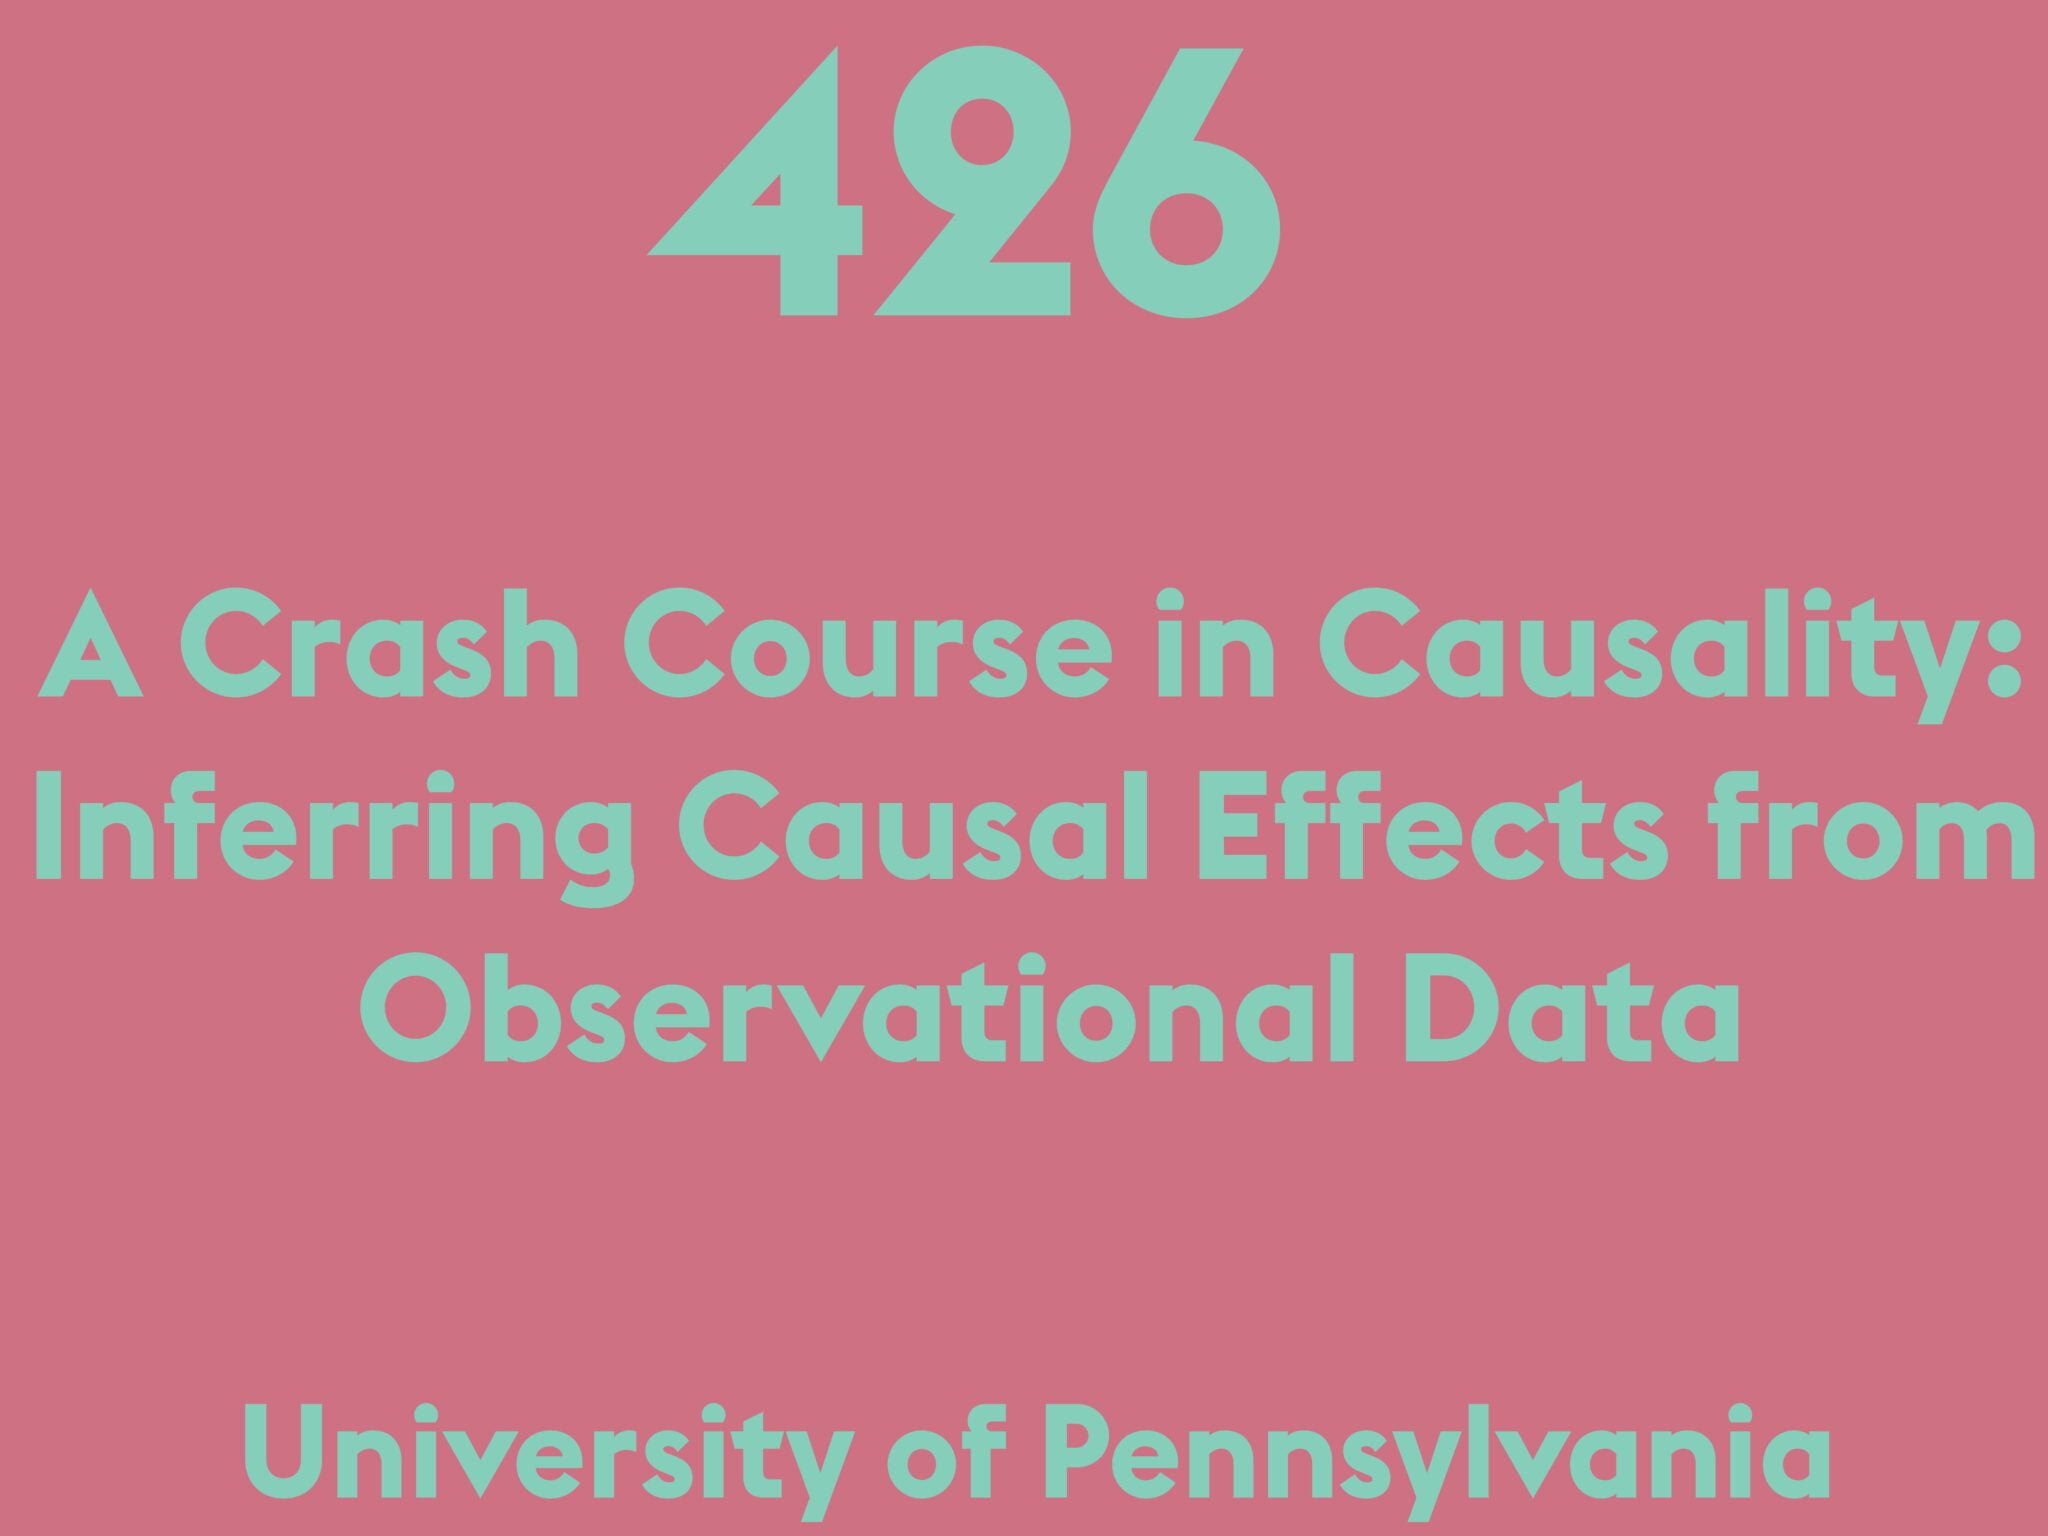 A Crash Course in Causality: Inferring Causal Effects from Observational Data